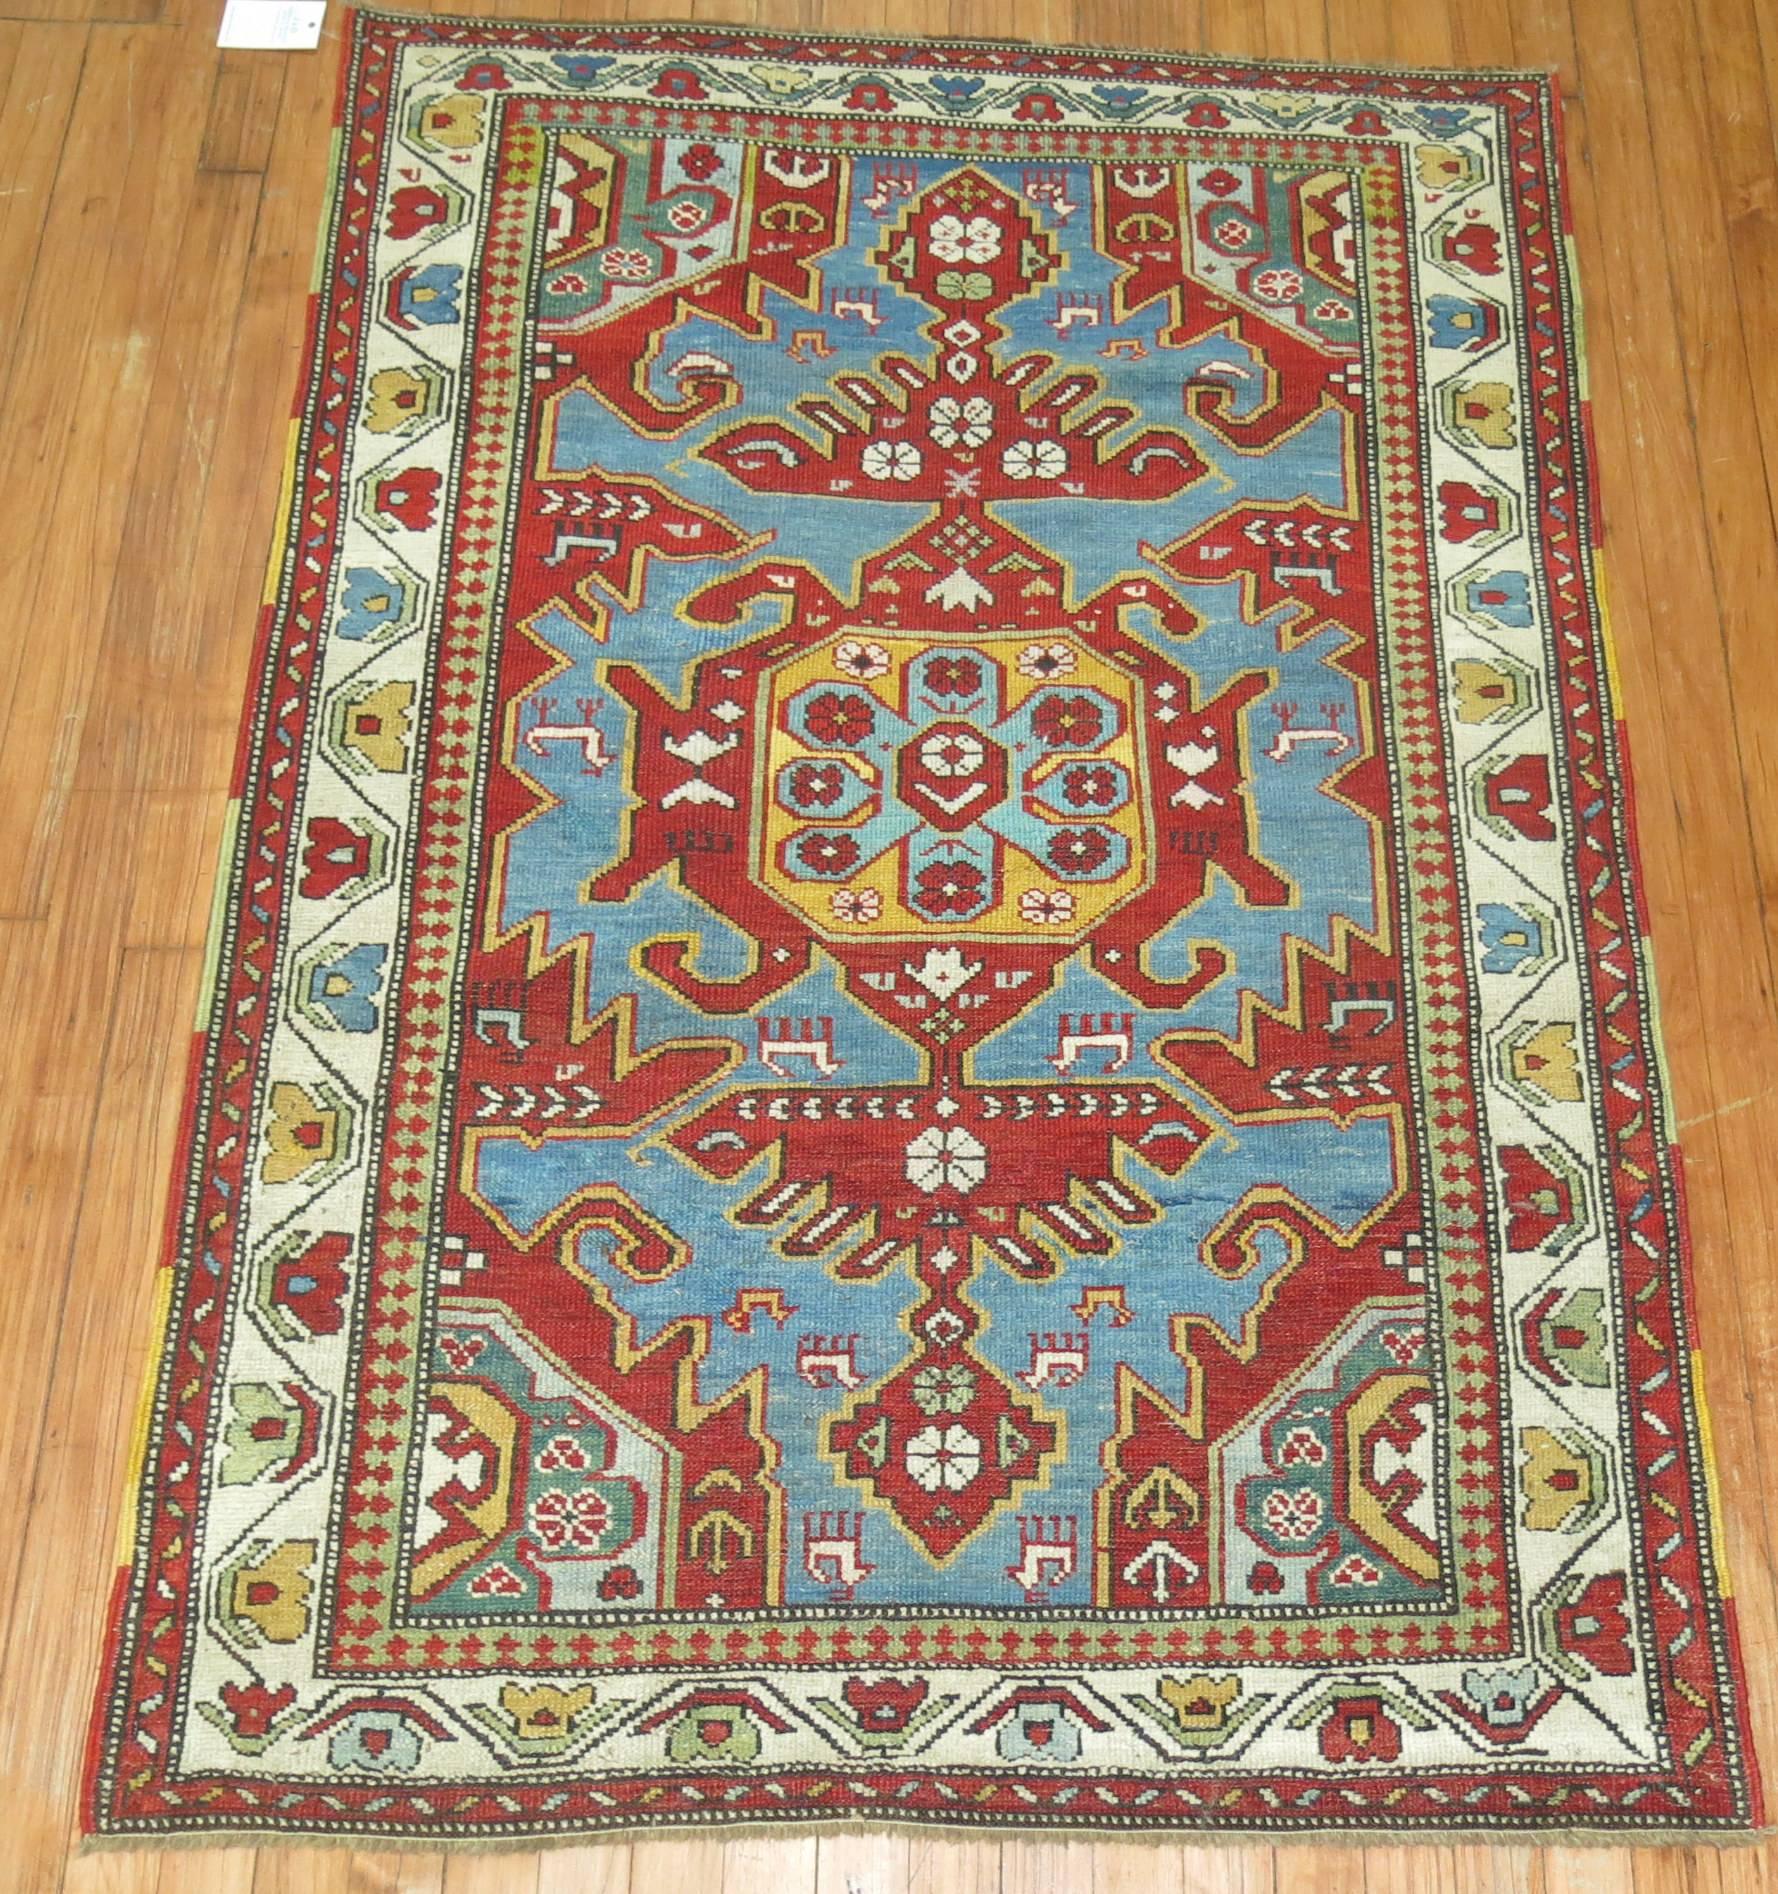 Beautiful antique tribal Caucasian rug featuring a turquoise background. Excellent quality and colors.